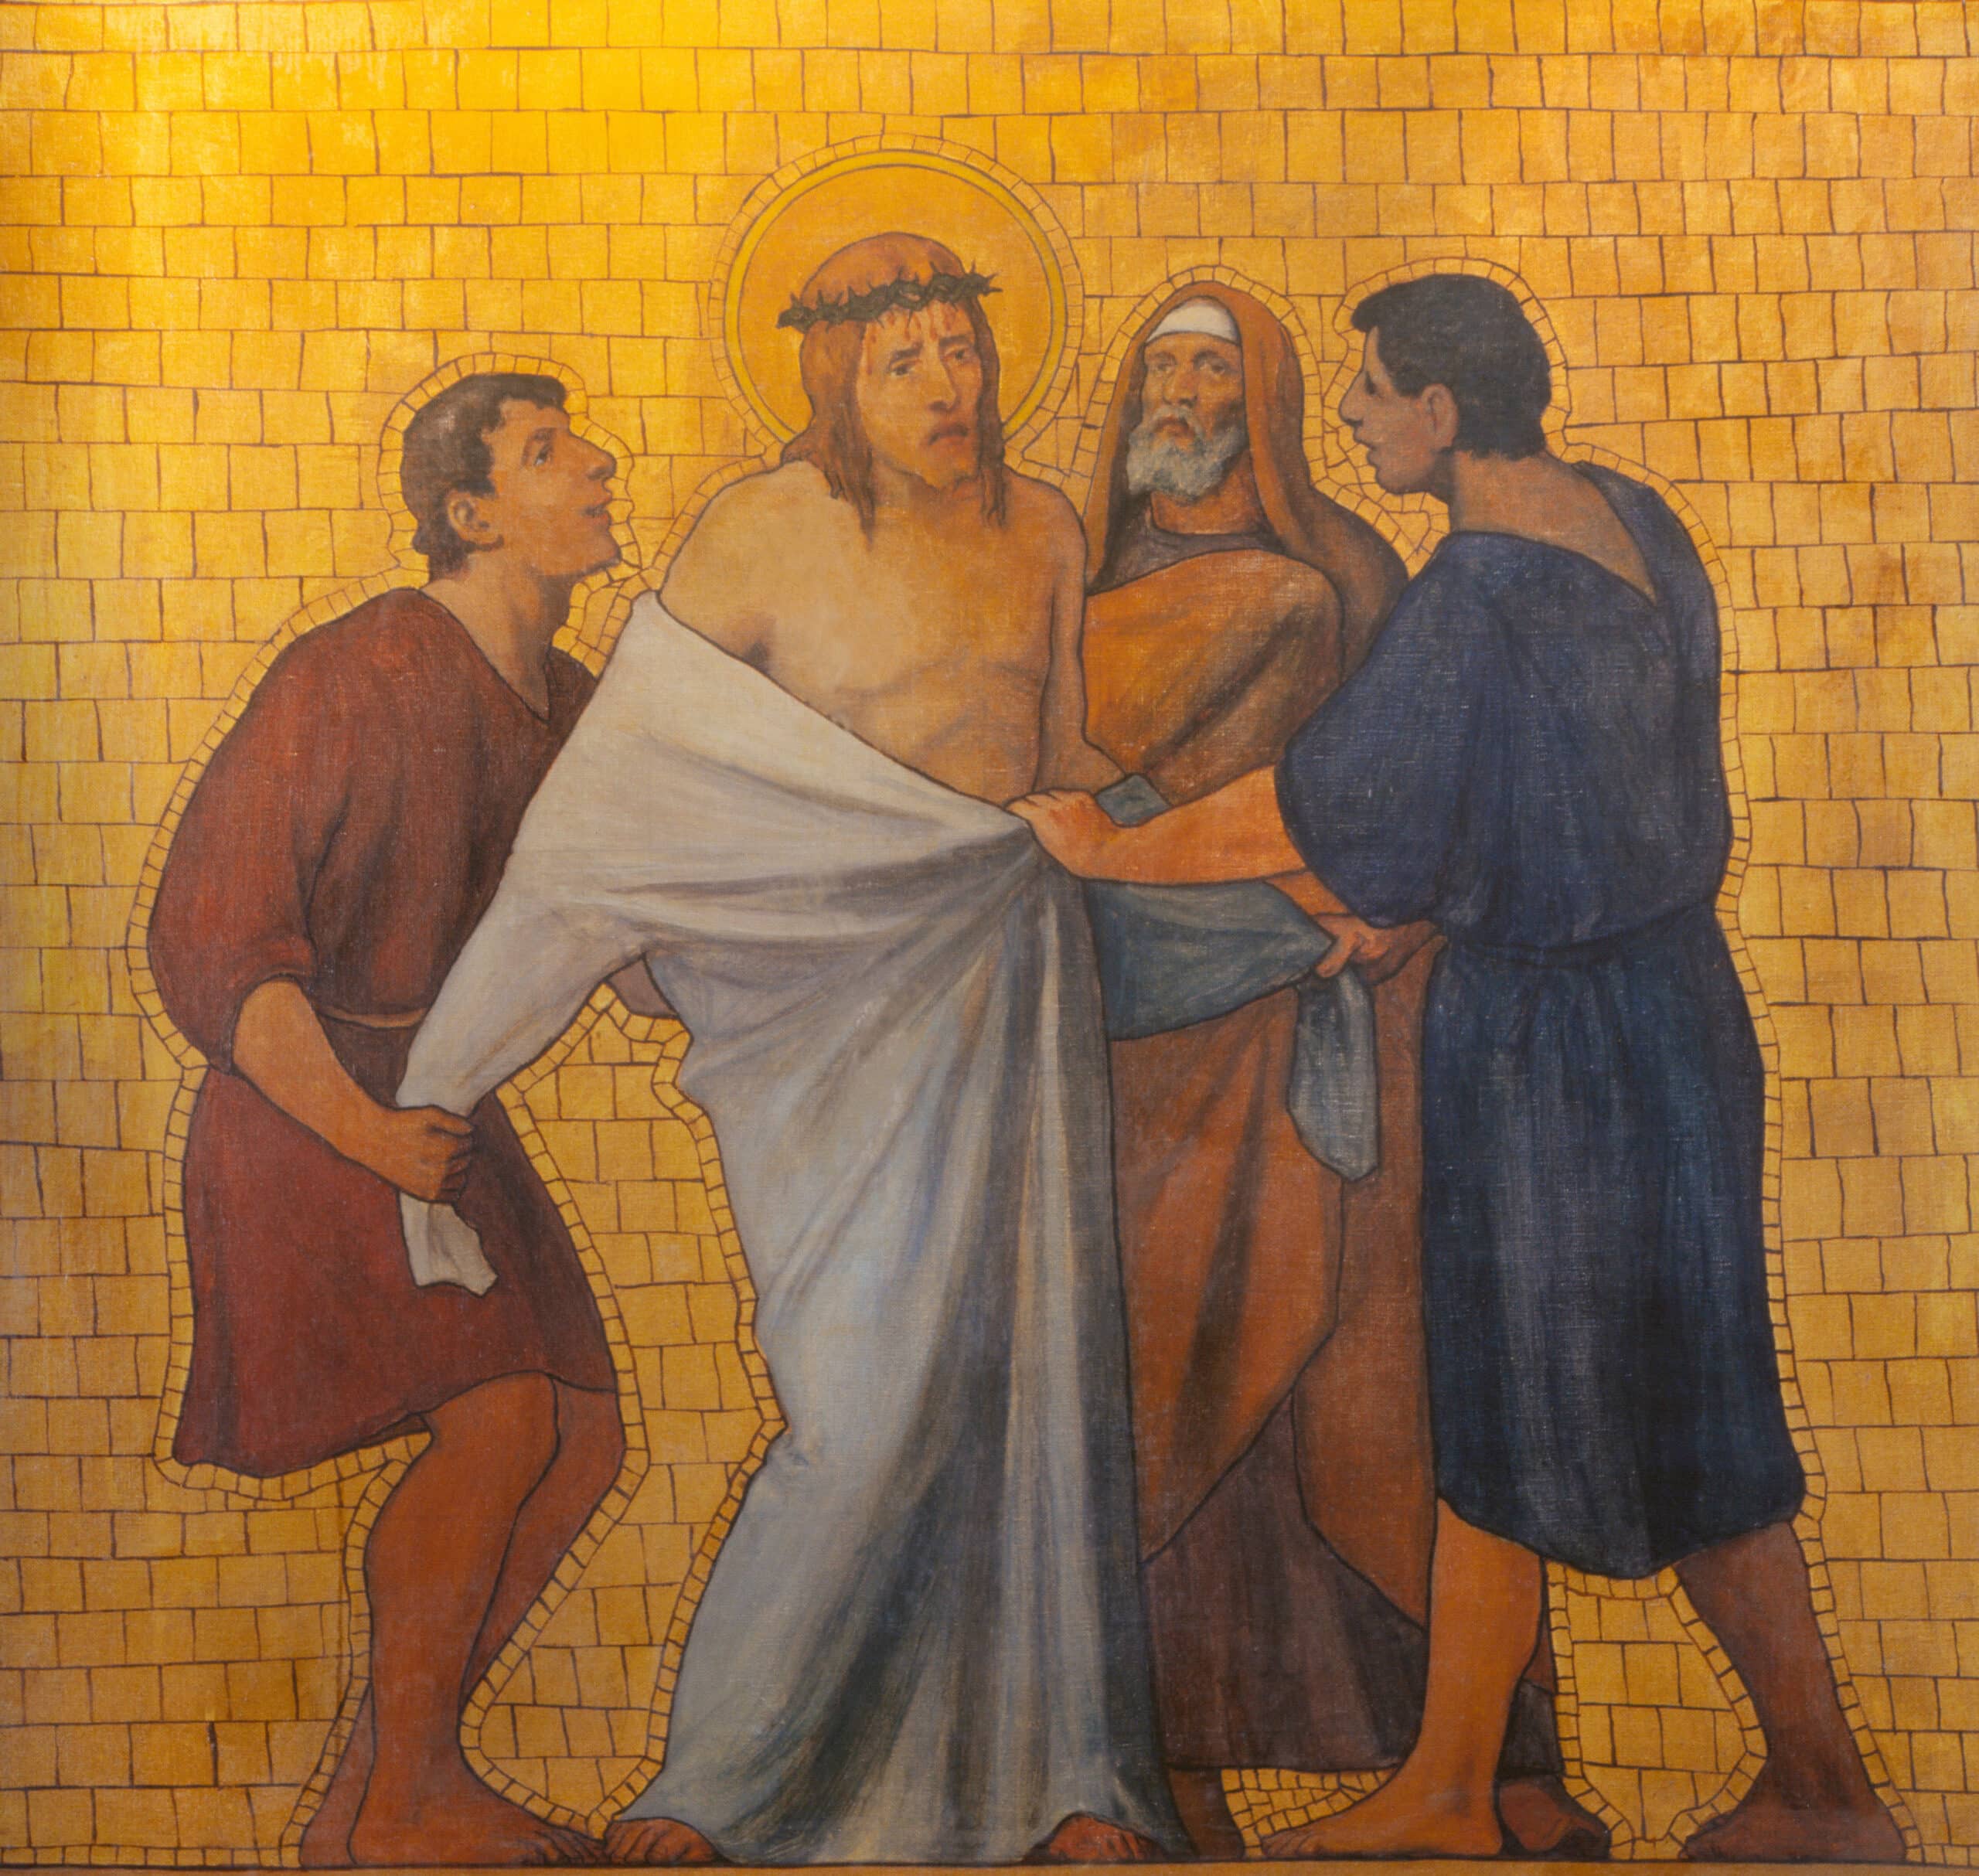 Jesus was tortured and mocked bu the Roman guards.